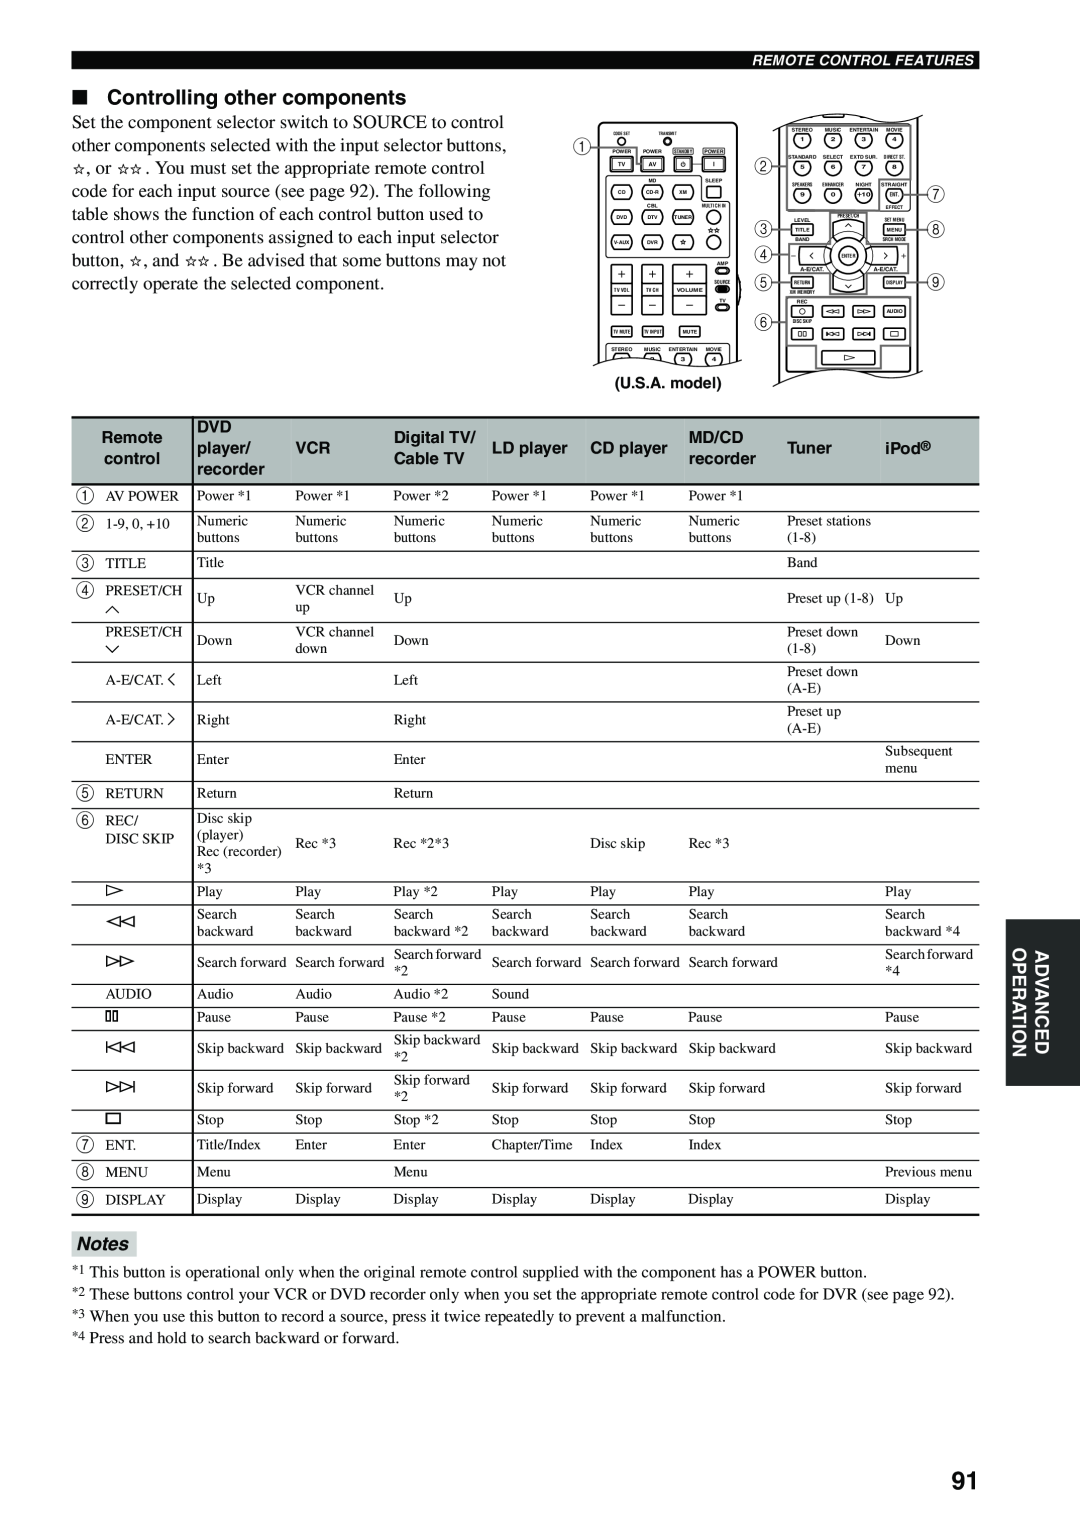 Yamaha RX-V559 owner manual Controlling other components, Notes 